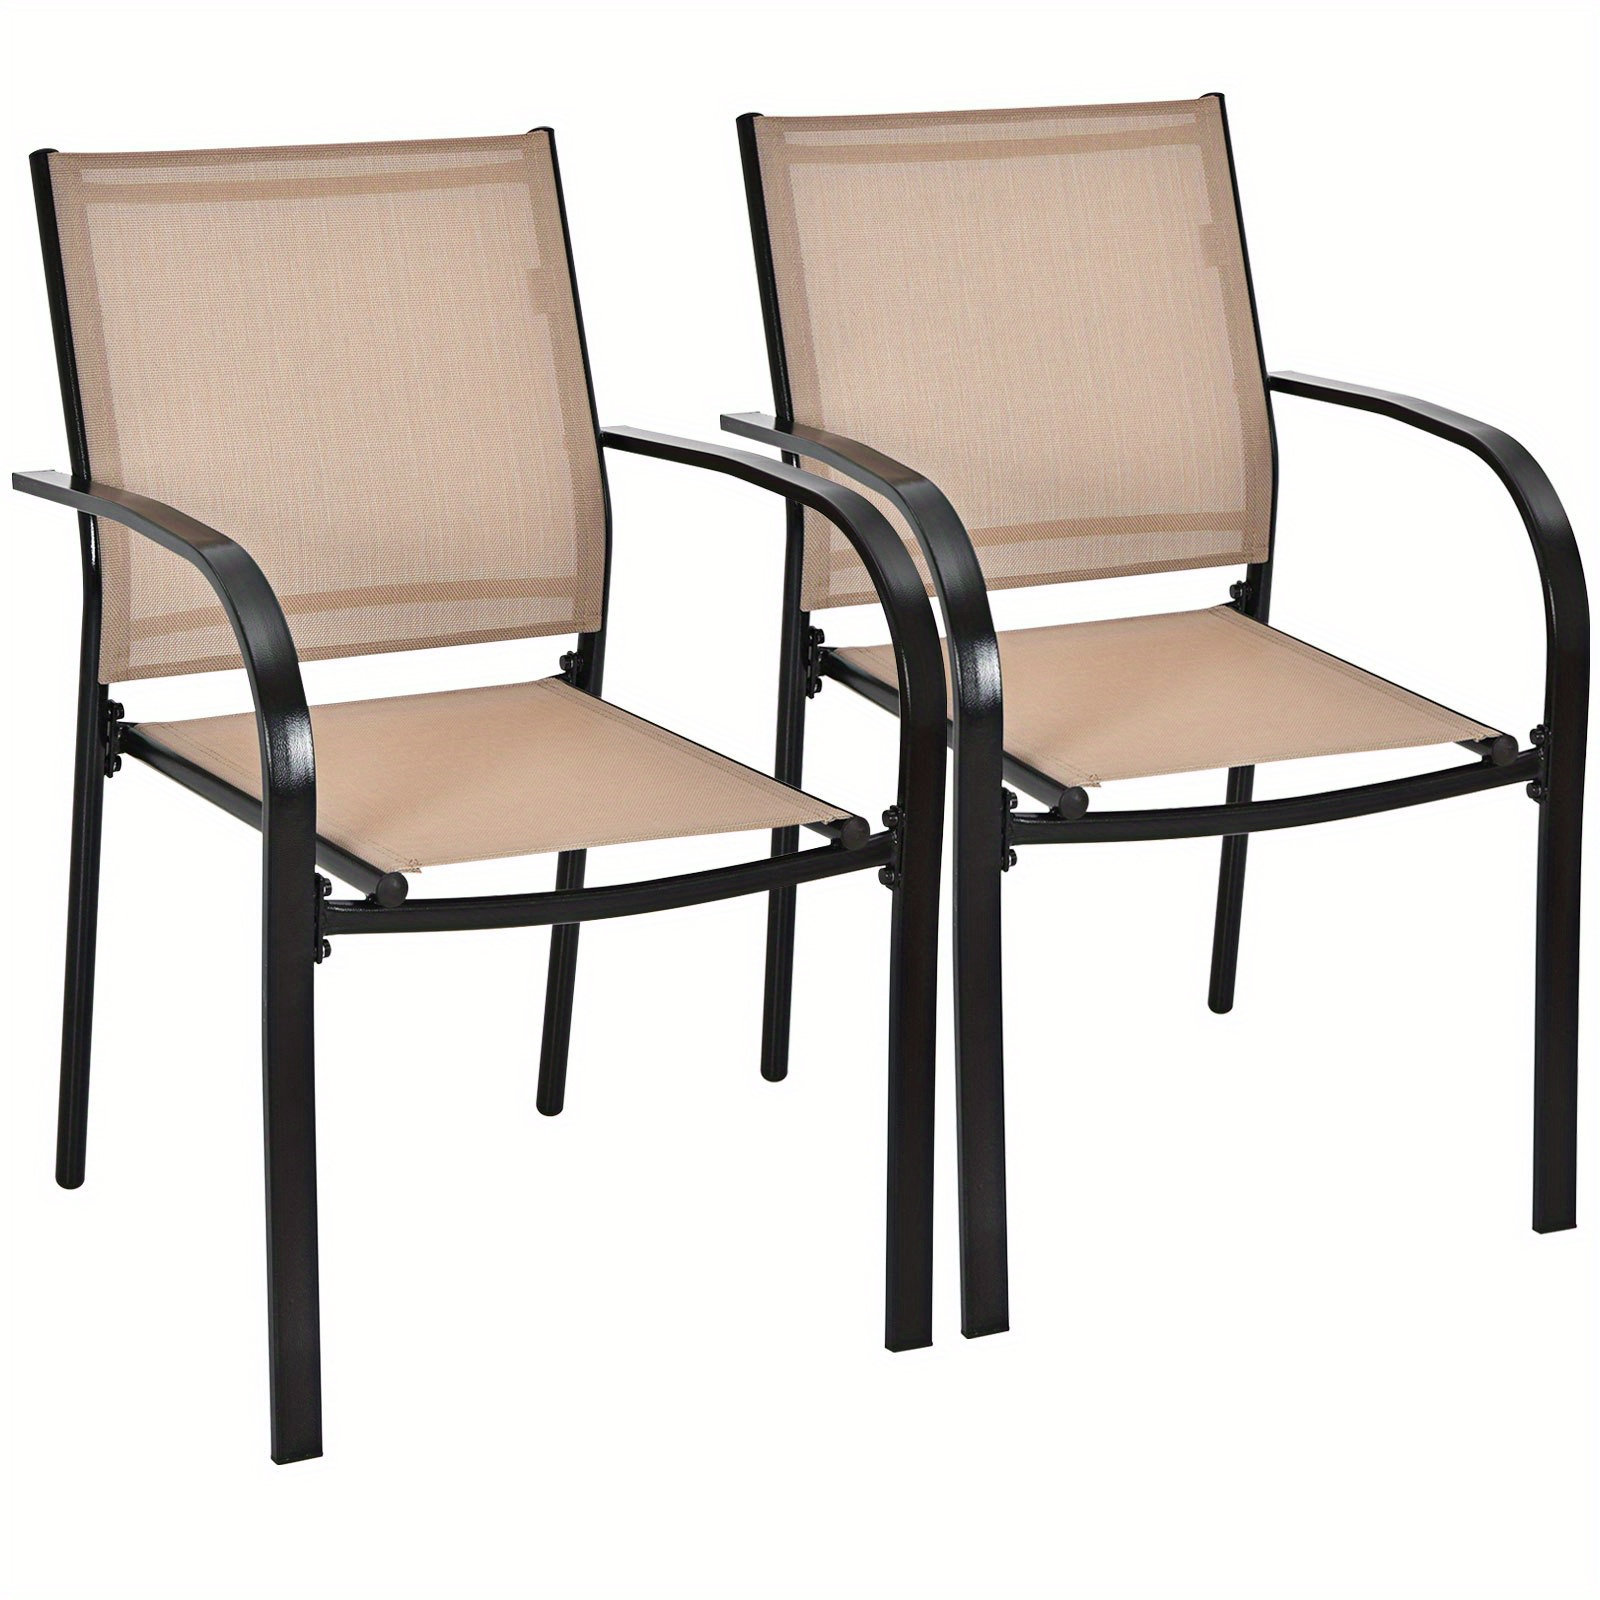 

Lifezeal Set Of 2 Patio Dining Chairs Stackable With Armrests Garden Deck Brown